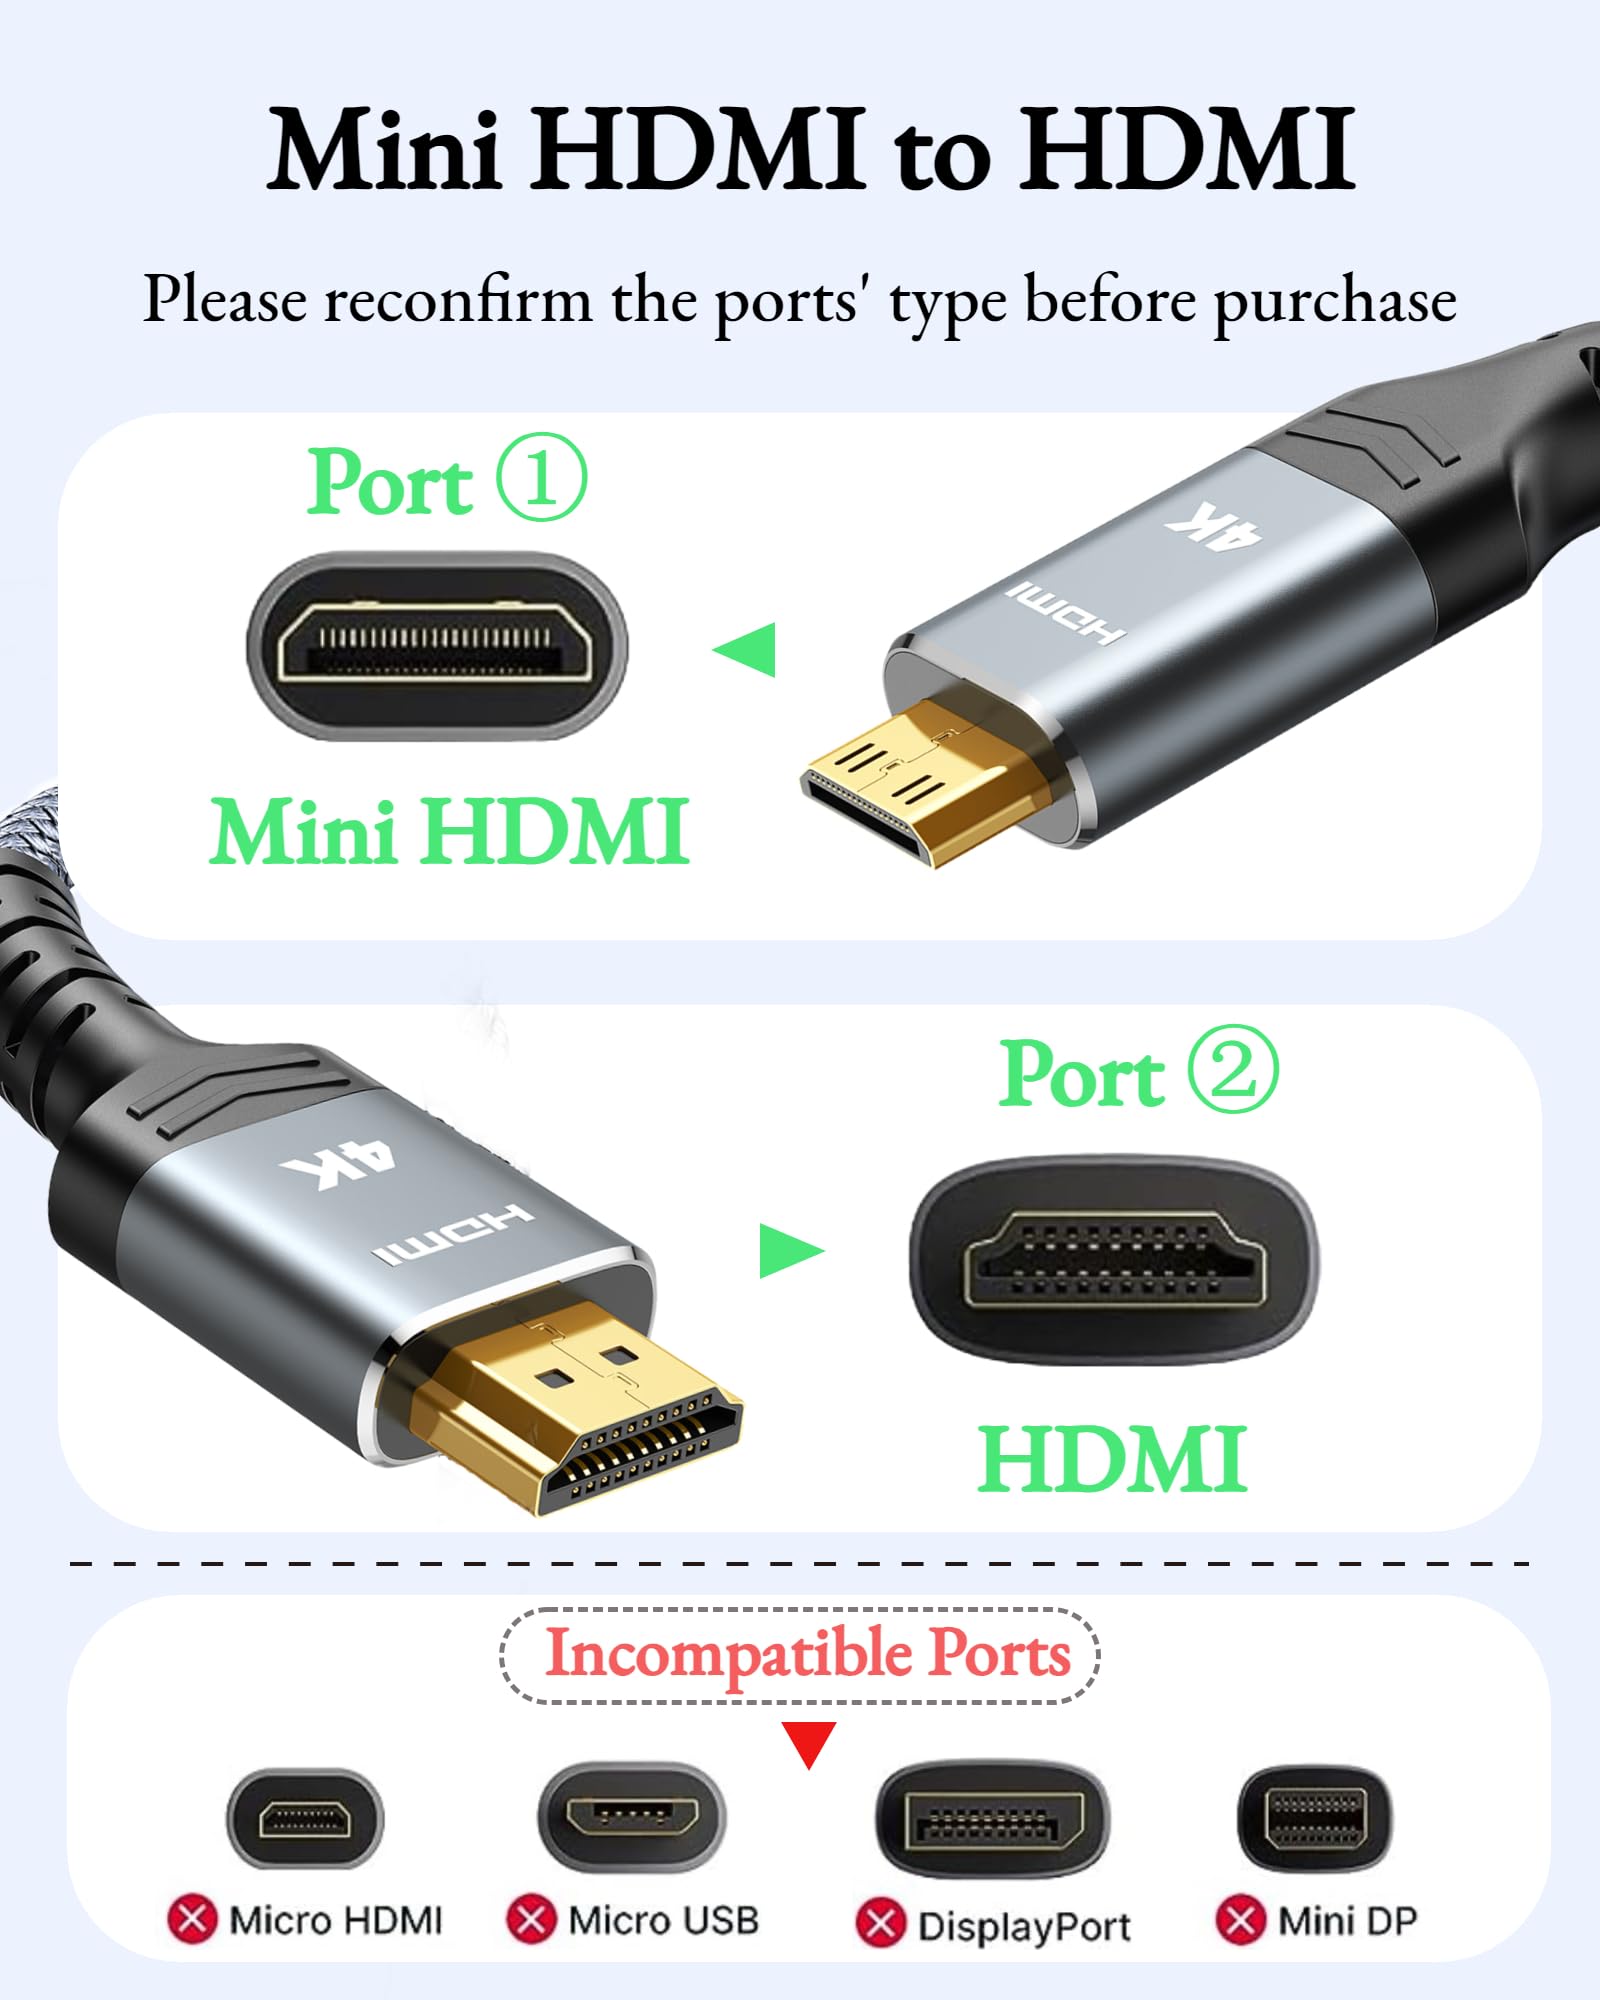 Highwings Mini HDMI to HDMI Cable 10FT, 4K 60Hz High Speed HDMI to Mini HDMI Cable Male Bi-Directional 2.0 Cord, for HDTV, Tablet, Camera and Camcorder [Aluminum Shell, Nylon Braided]